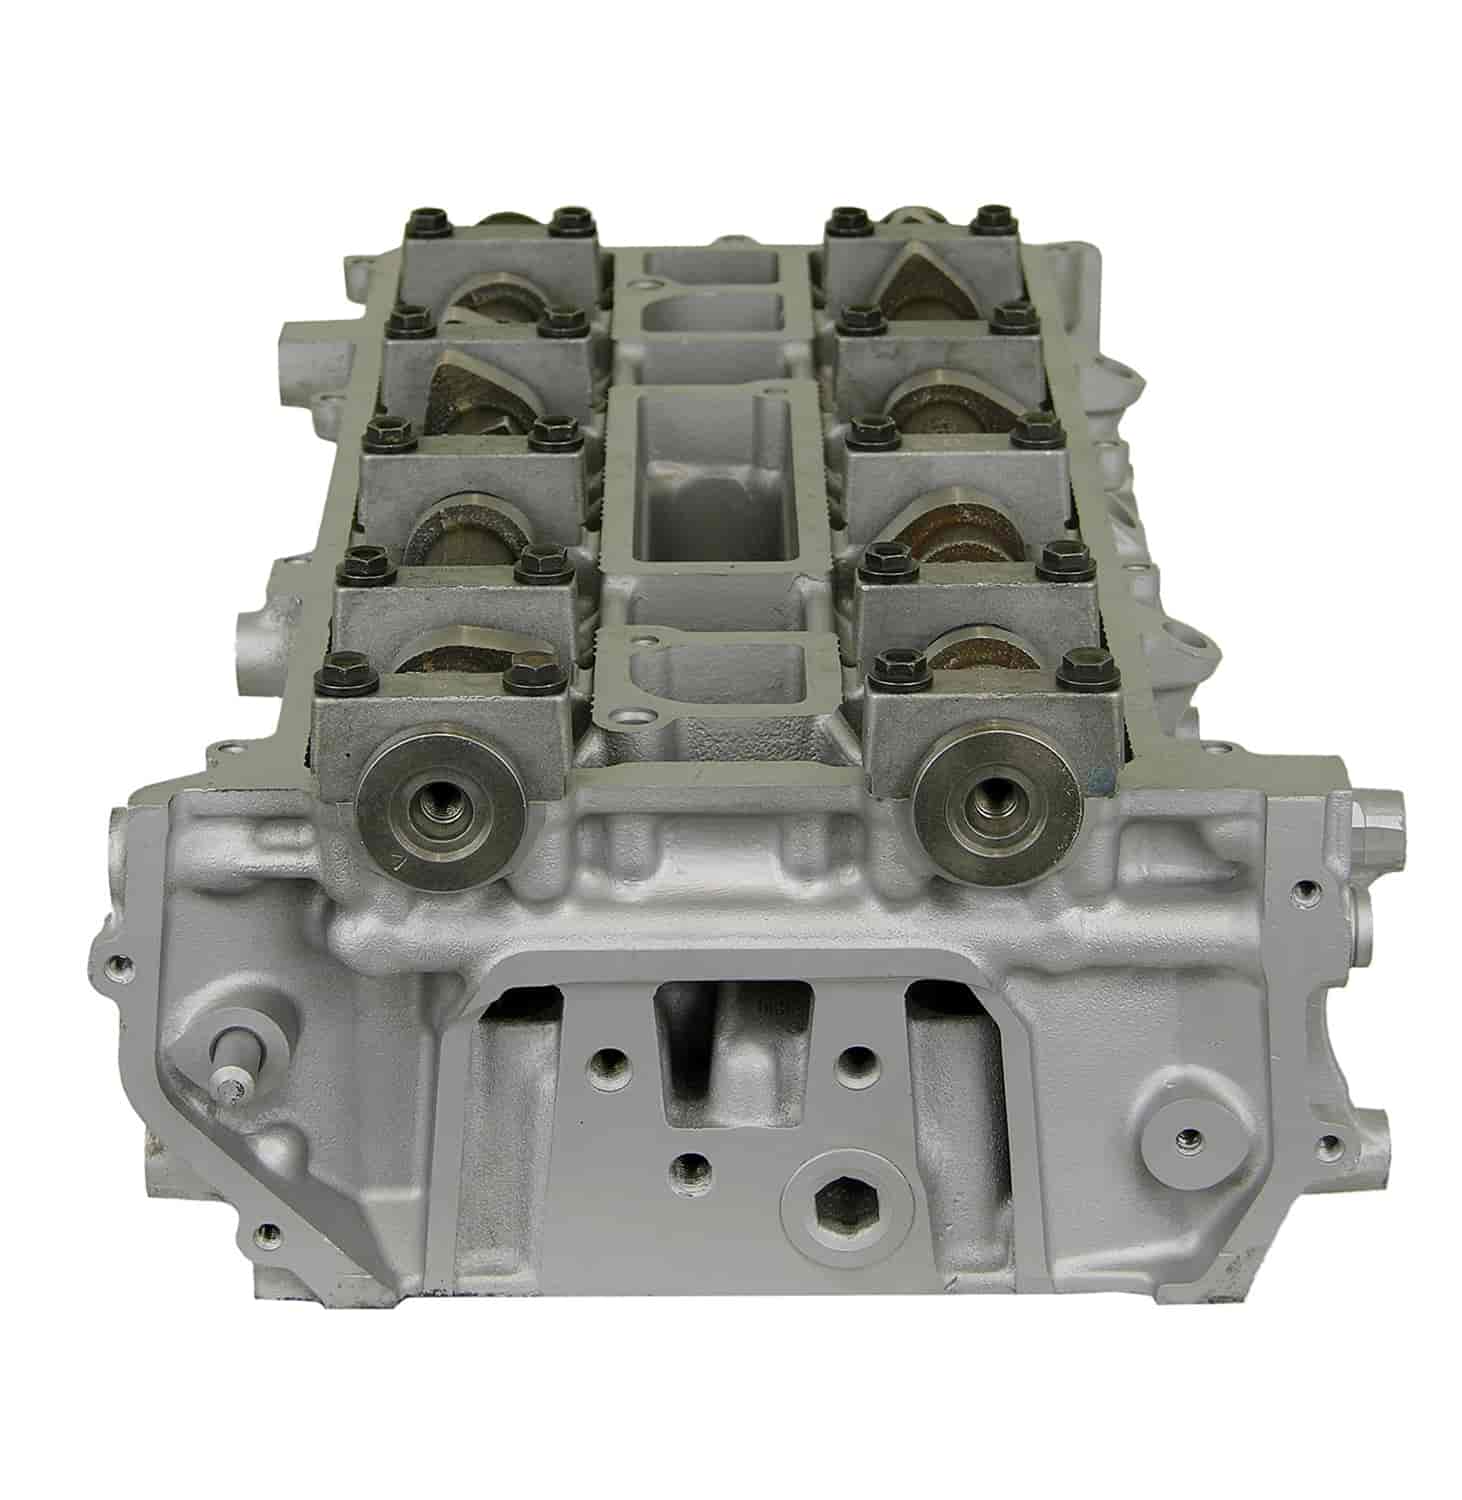 Remanufactured Cylinder Head for 2003-2011 Ford/Mazda with 2.0/2.3L L4